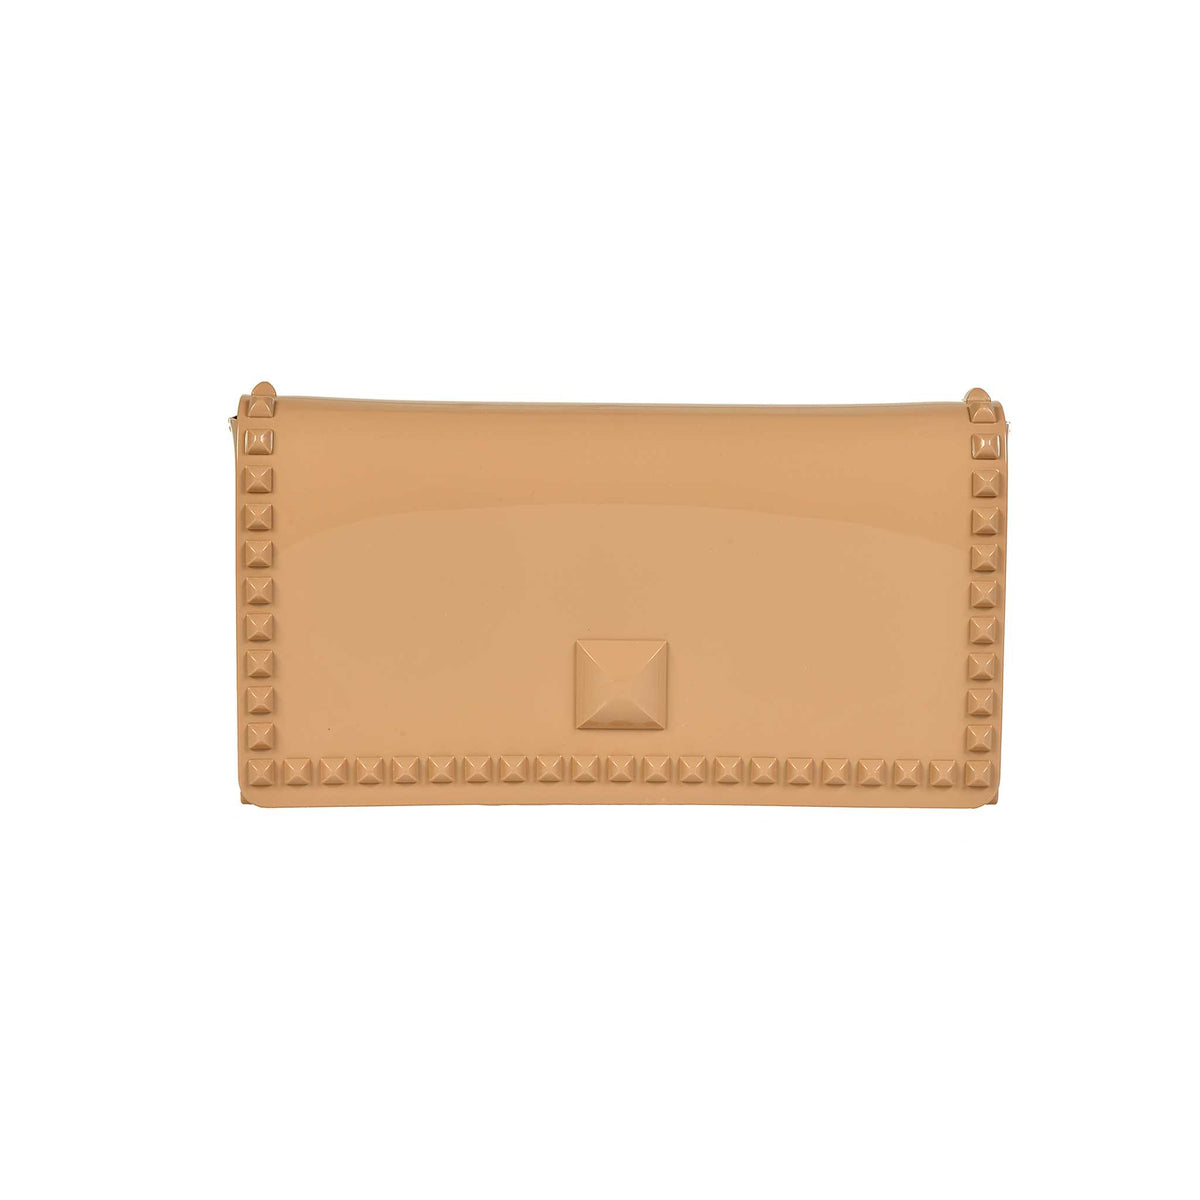 Sustainable nude studded purse from Carmen Sol